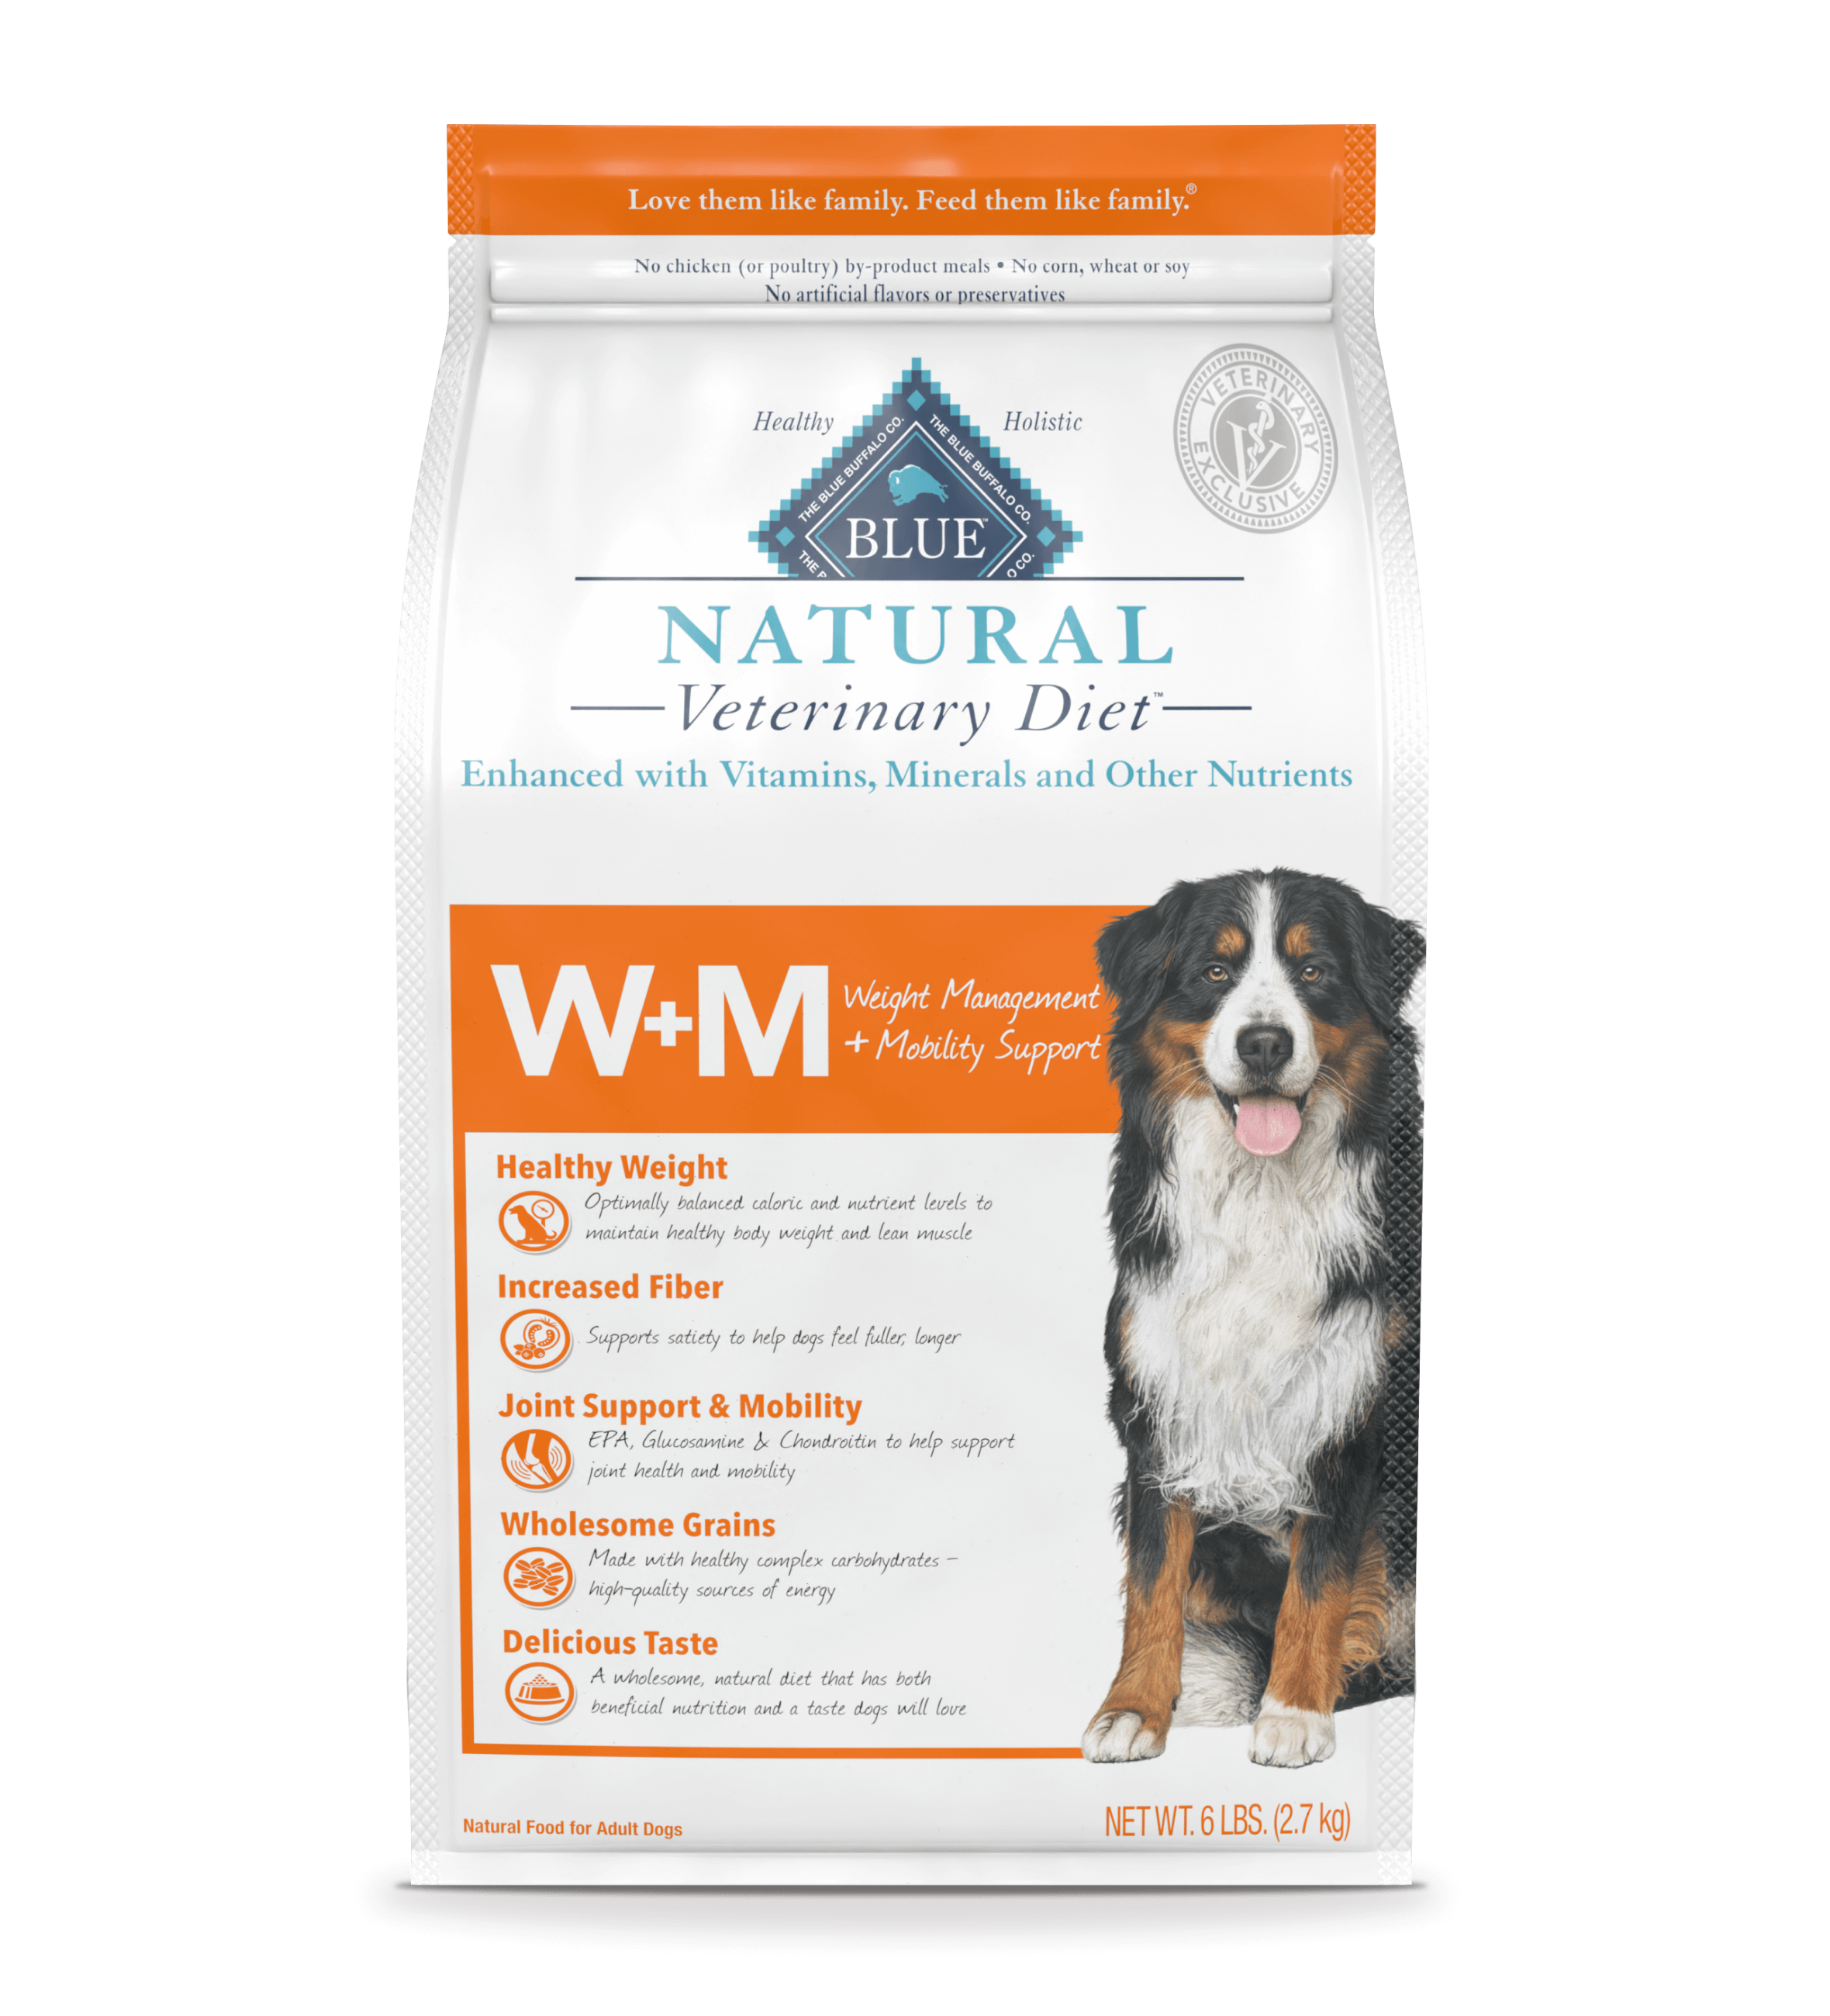 blue natural veterinary diet w+m weight management + mobility support dog dry food